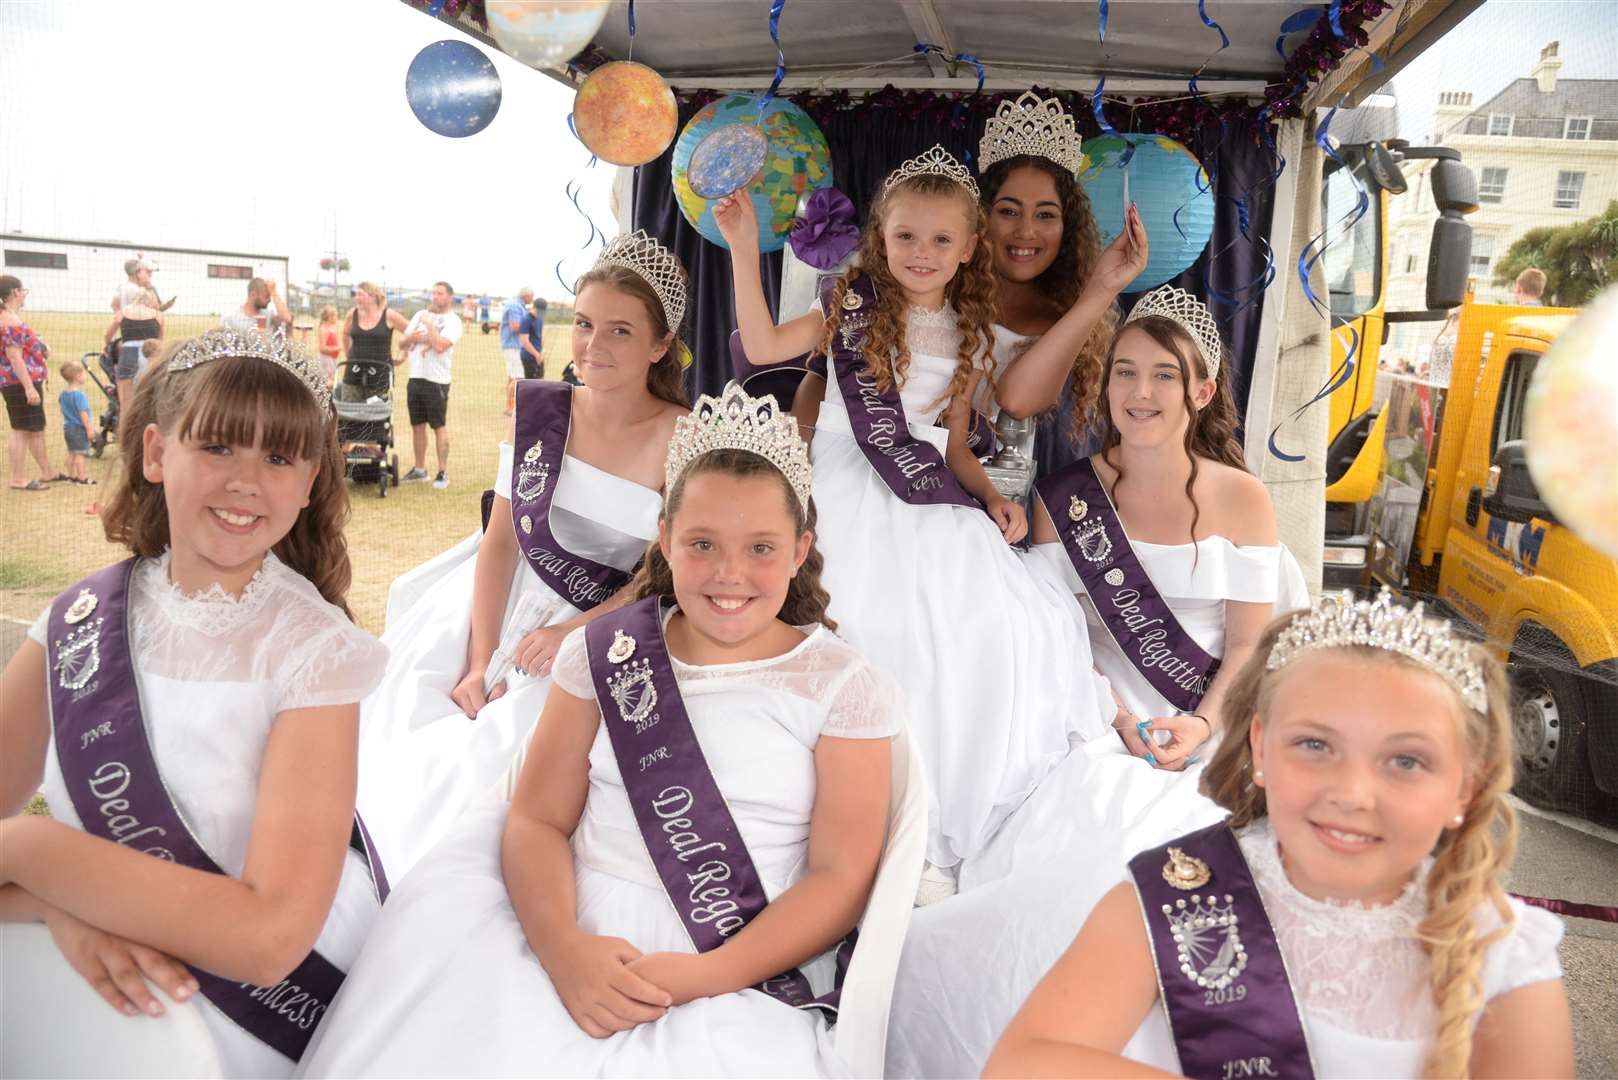 Selection of new queen and princesses for Deal Carnival Court 2020